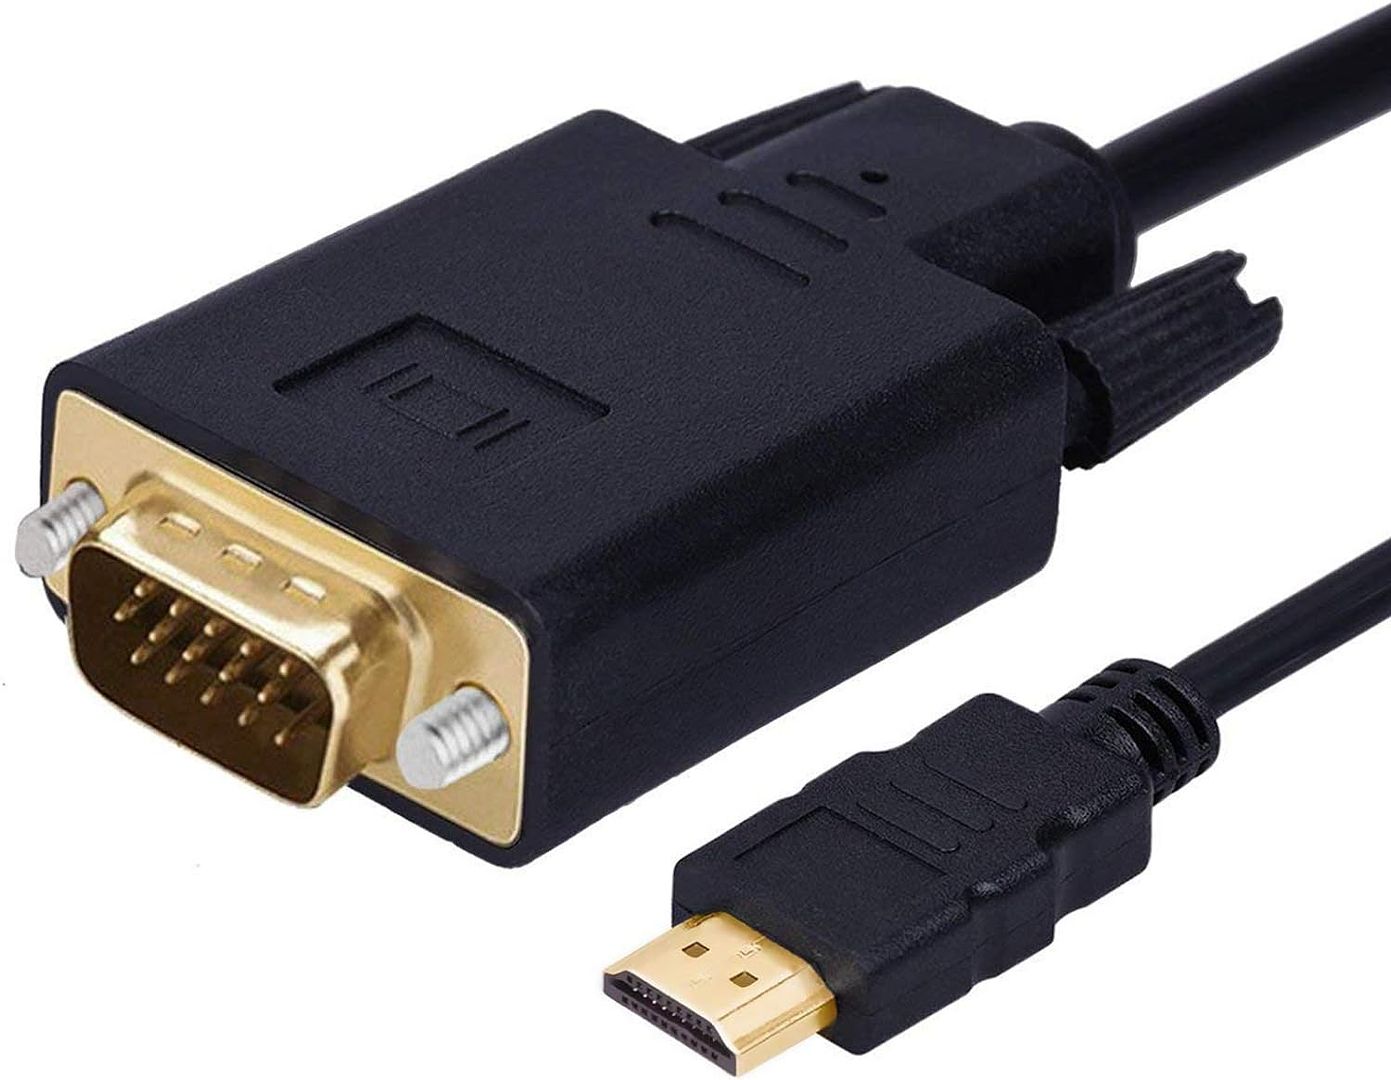 Wonlyus HDMI to VGA Cable Gold-Plated 1080P HDMI Male to VGA Male Active Video Adapter Converter Cord (6 Feet/1.8 Meters)